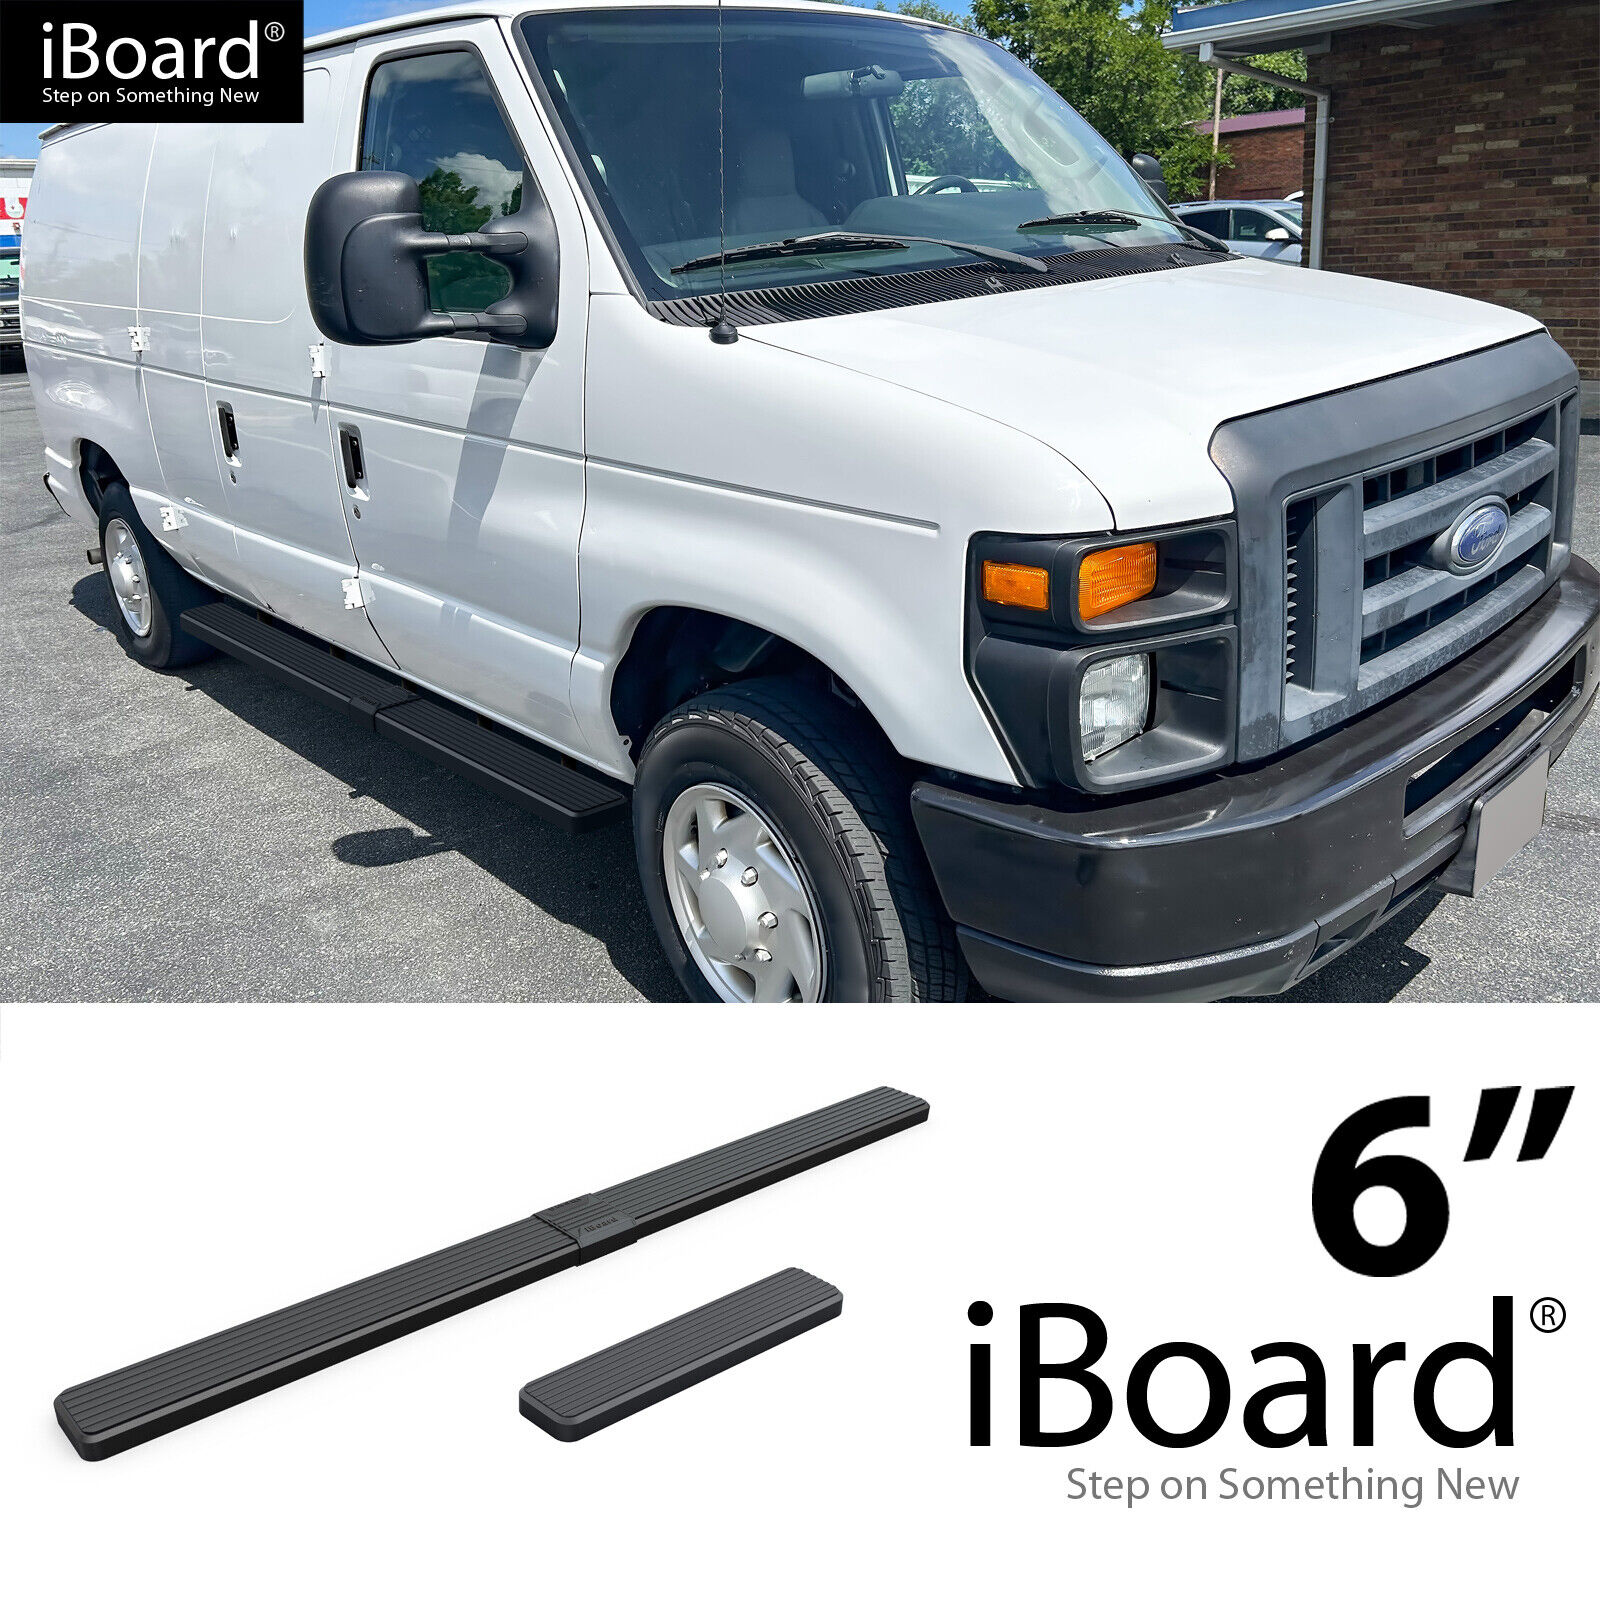 iBoard Stainless Steel 6in Running Boards Fit 99-14 Ford Econoline Full Size Van